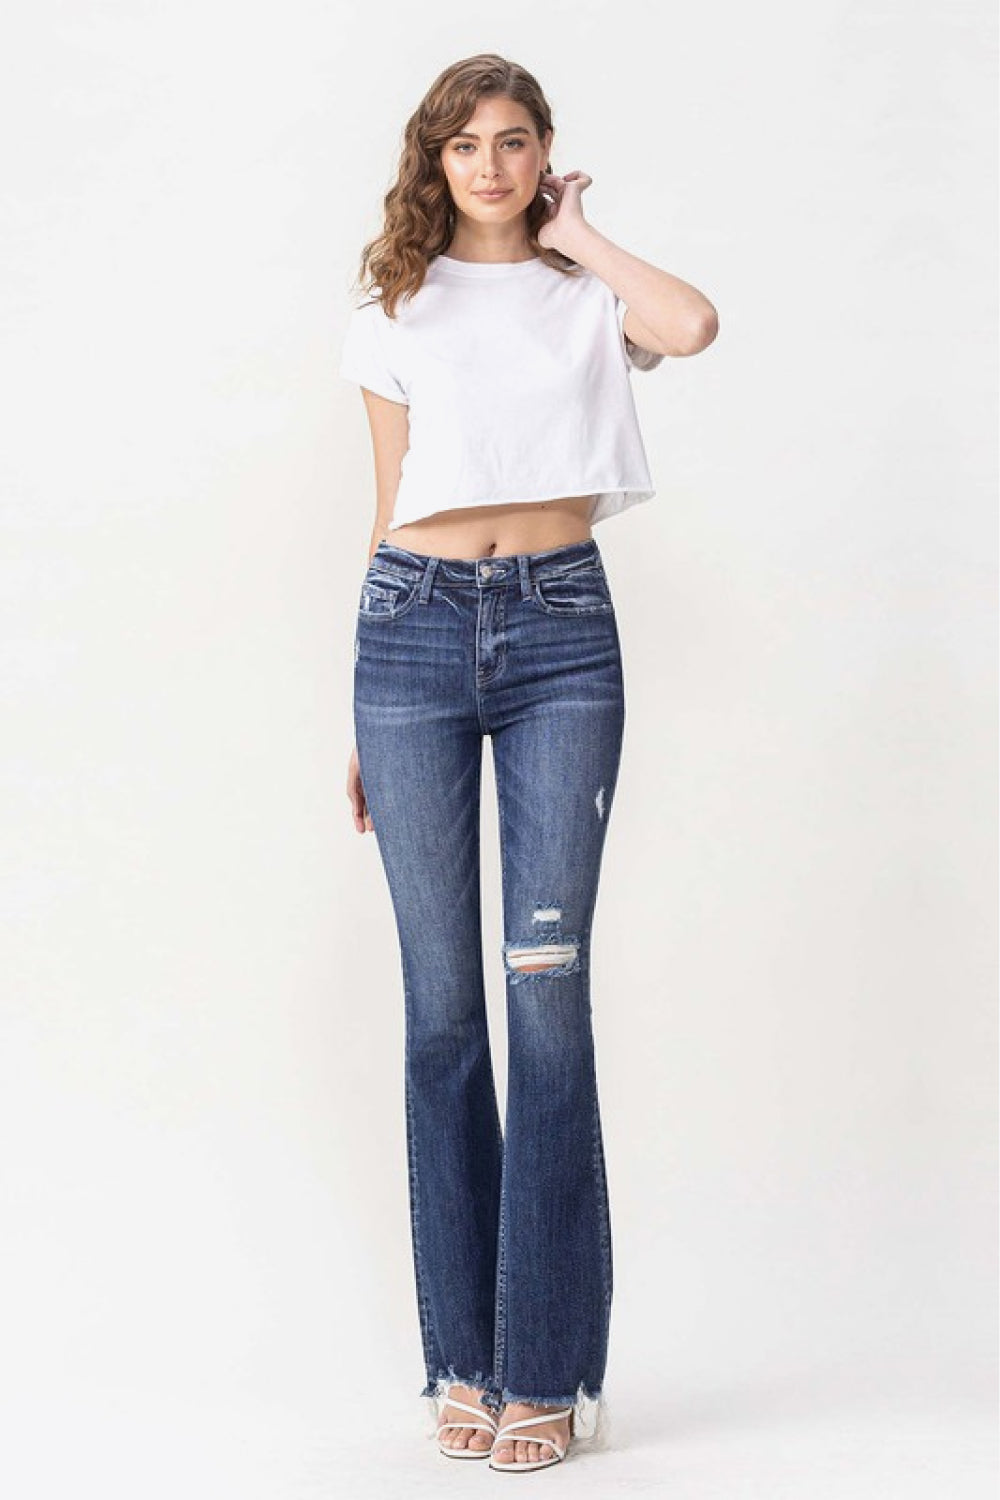 Vervet by Flying Monkey Luna Full Size High Rise Flare Jeans - Ships from The US - women's jeans at TFC&H Co.